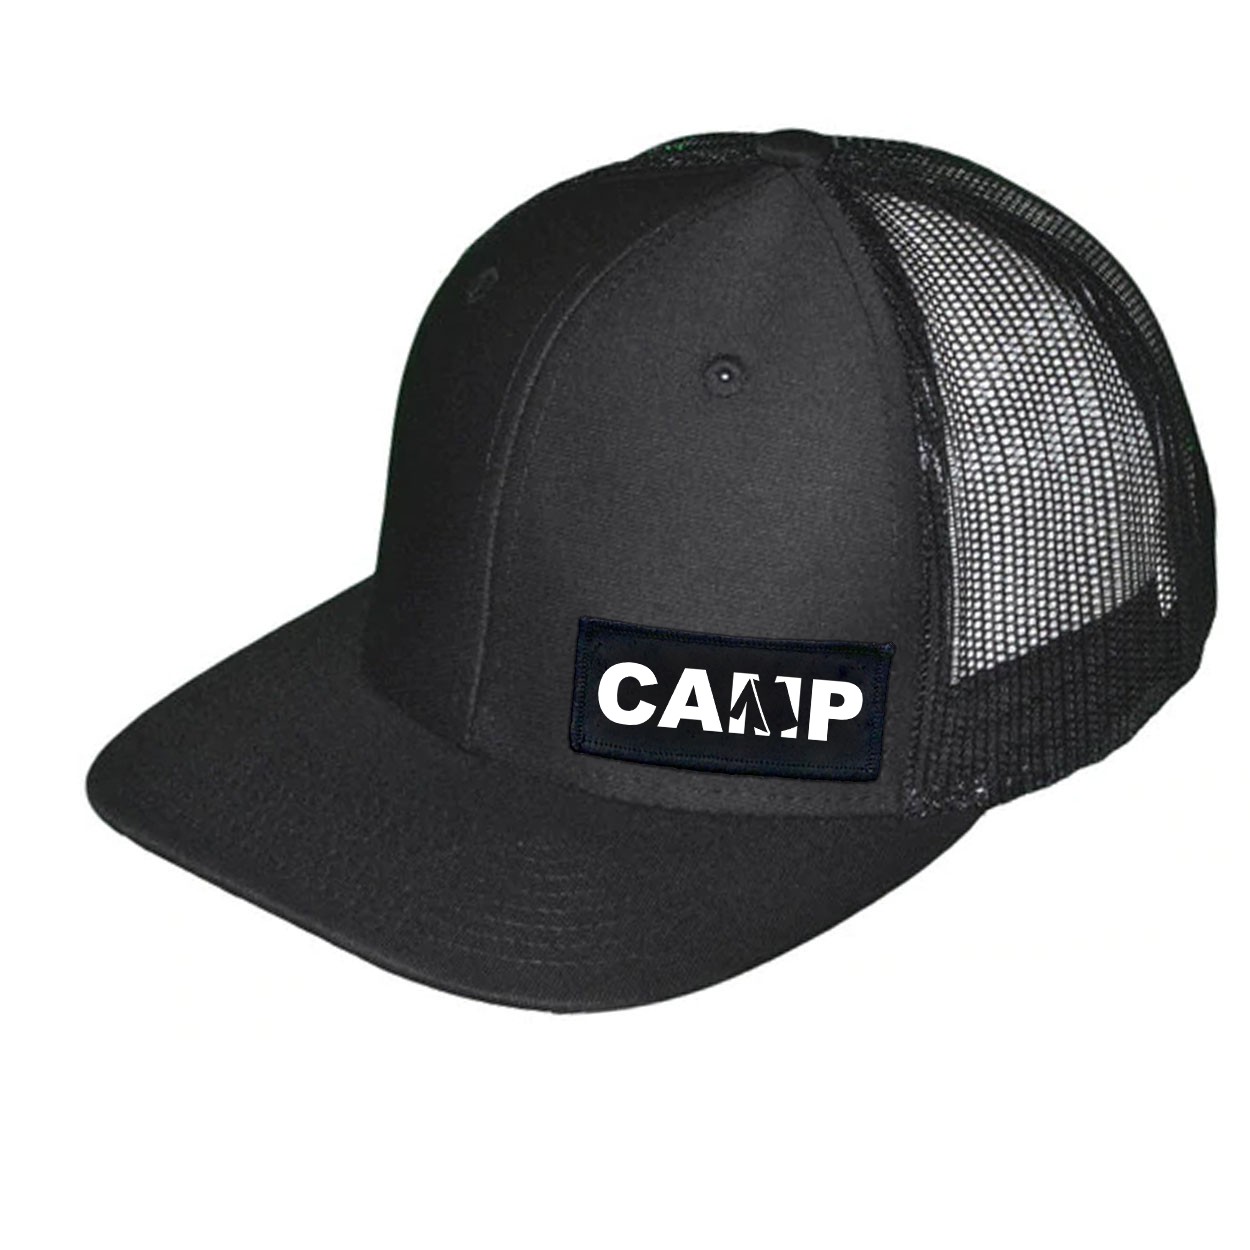 Camp Tent Logo Night Out Woven Patch Snapback Trucker Hat Black (White Logo)